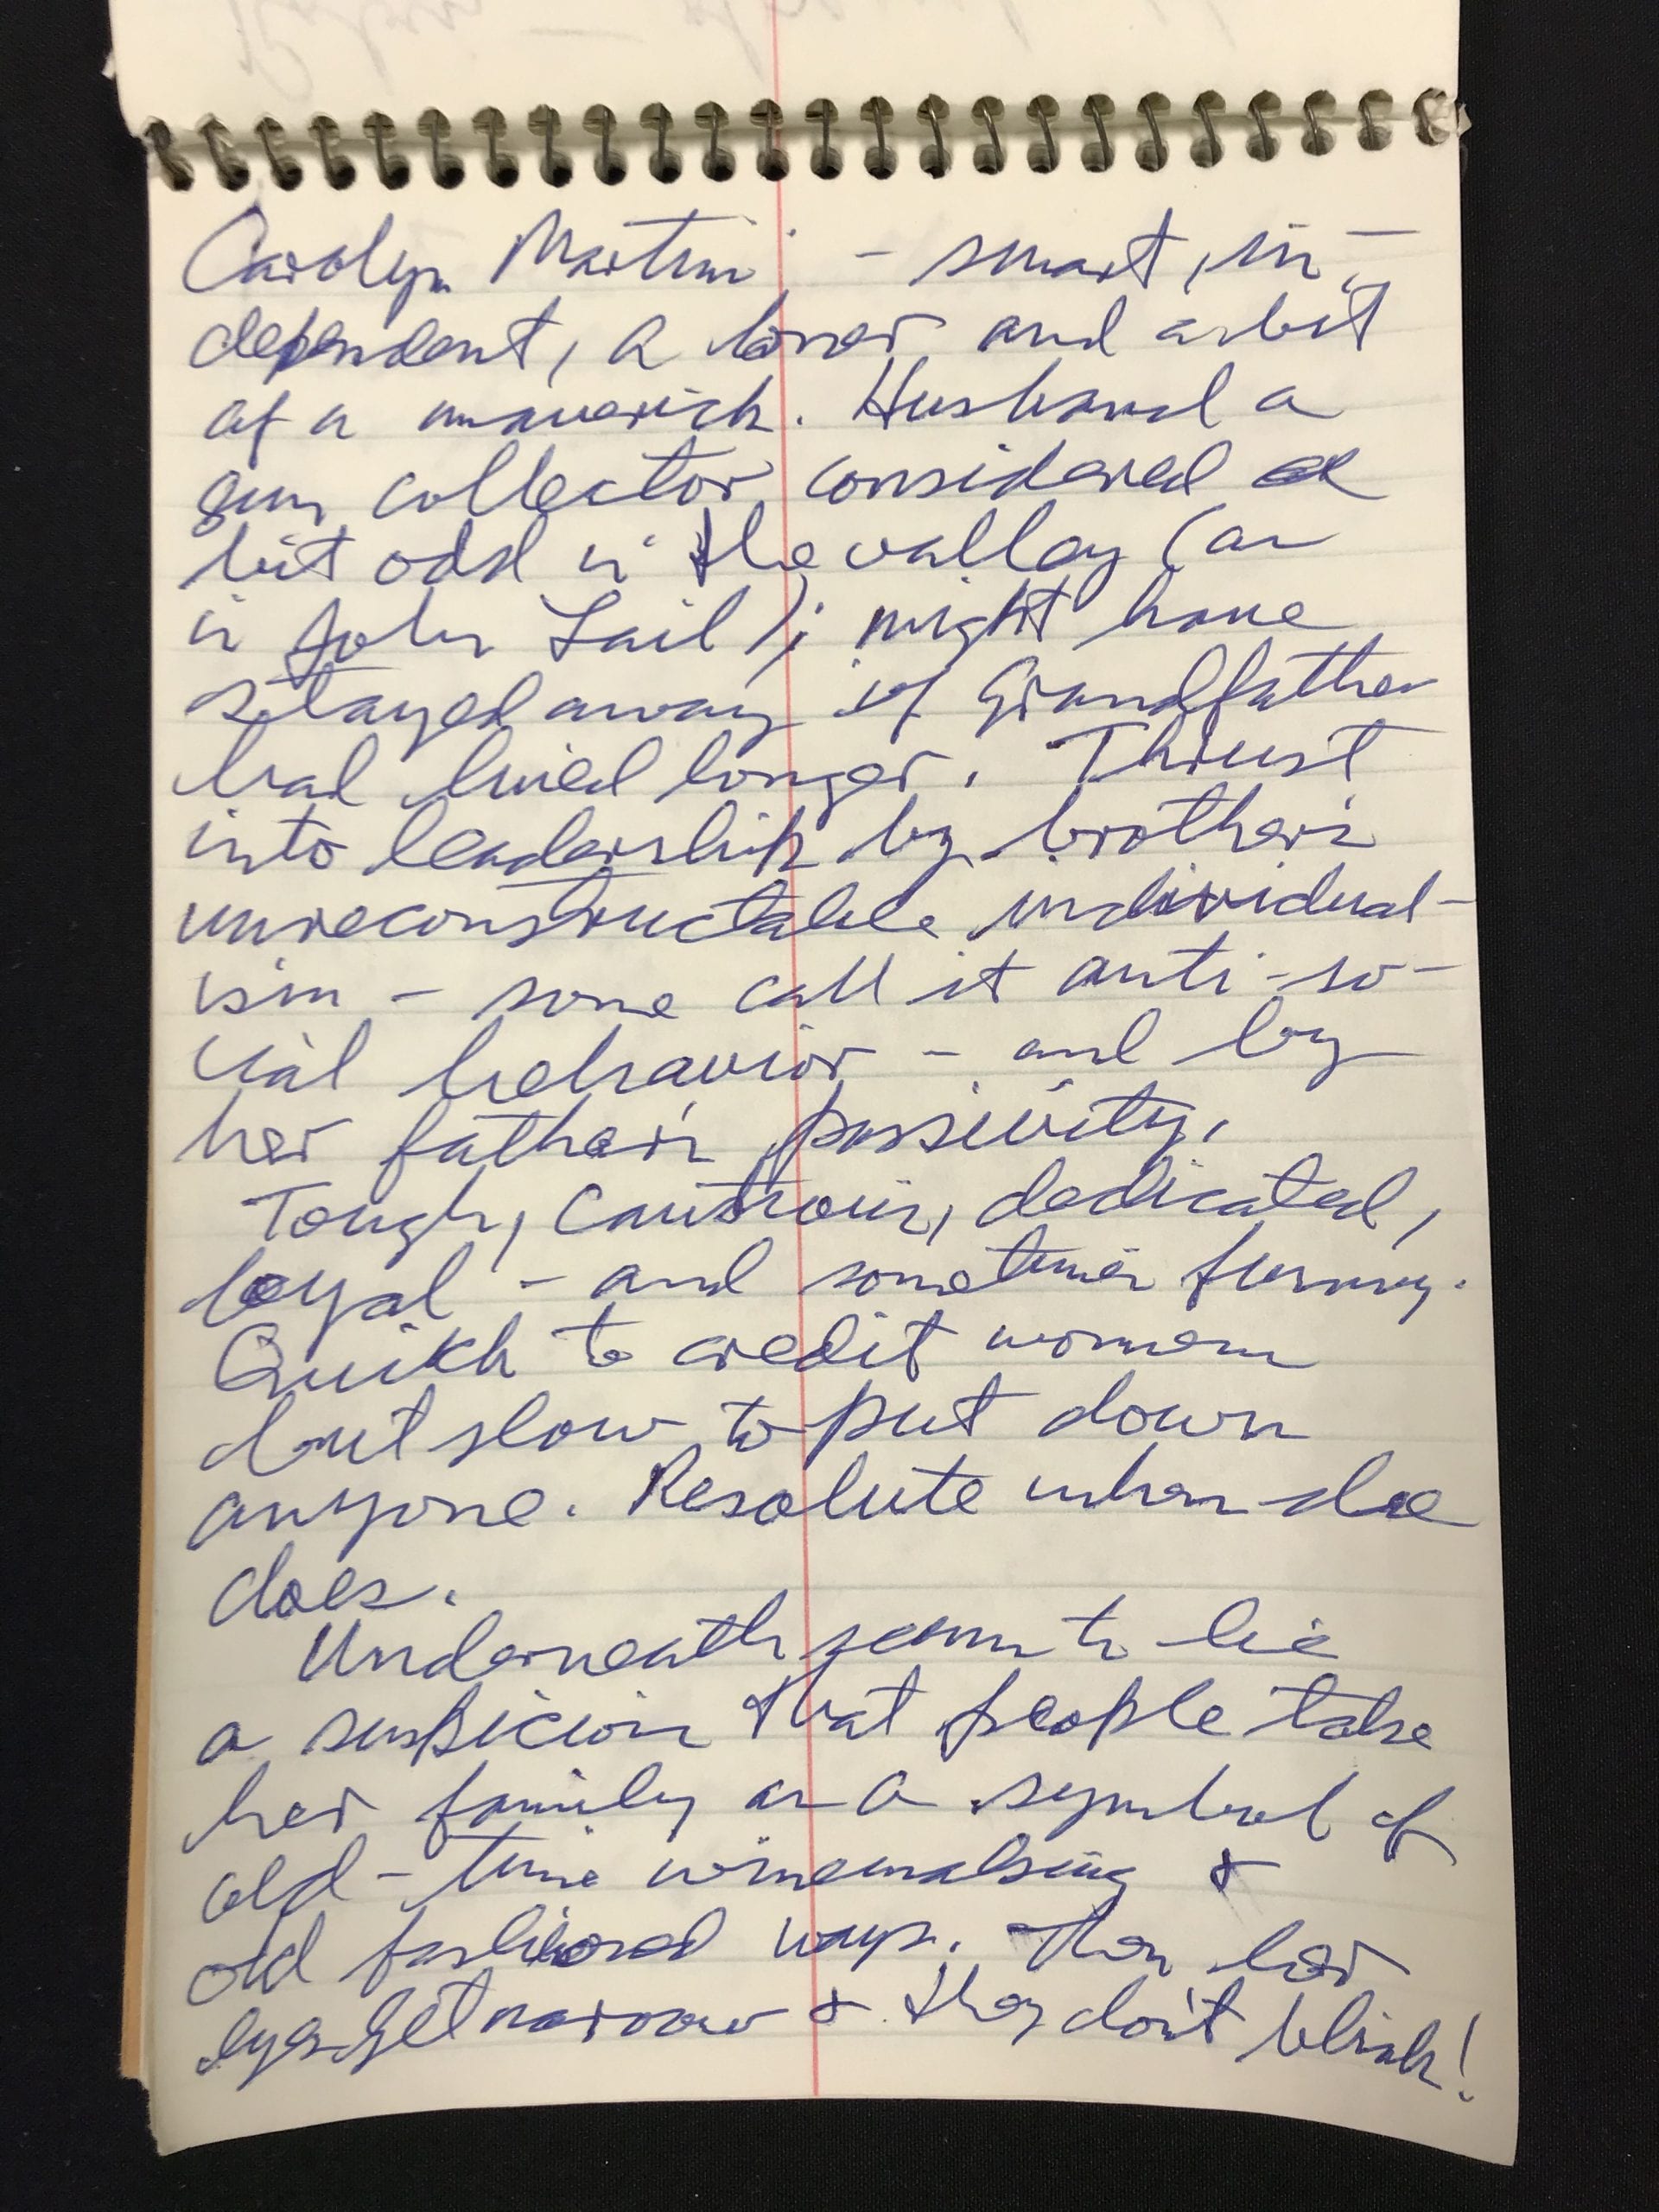 Page from Conaway notebook -- Carolyn Martini profile